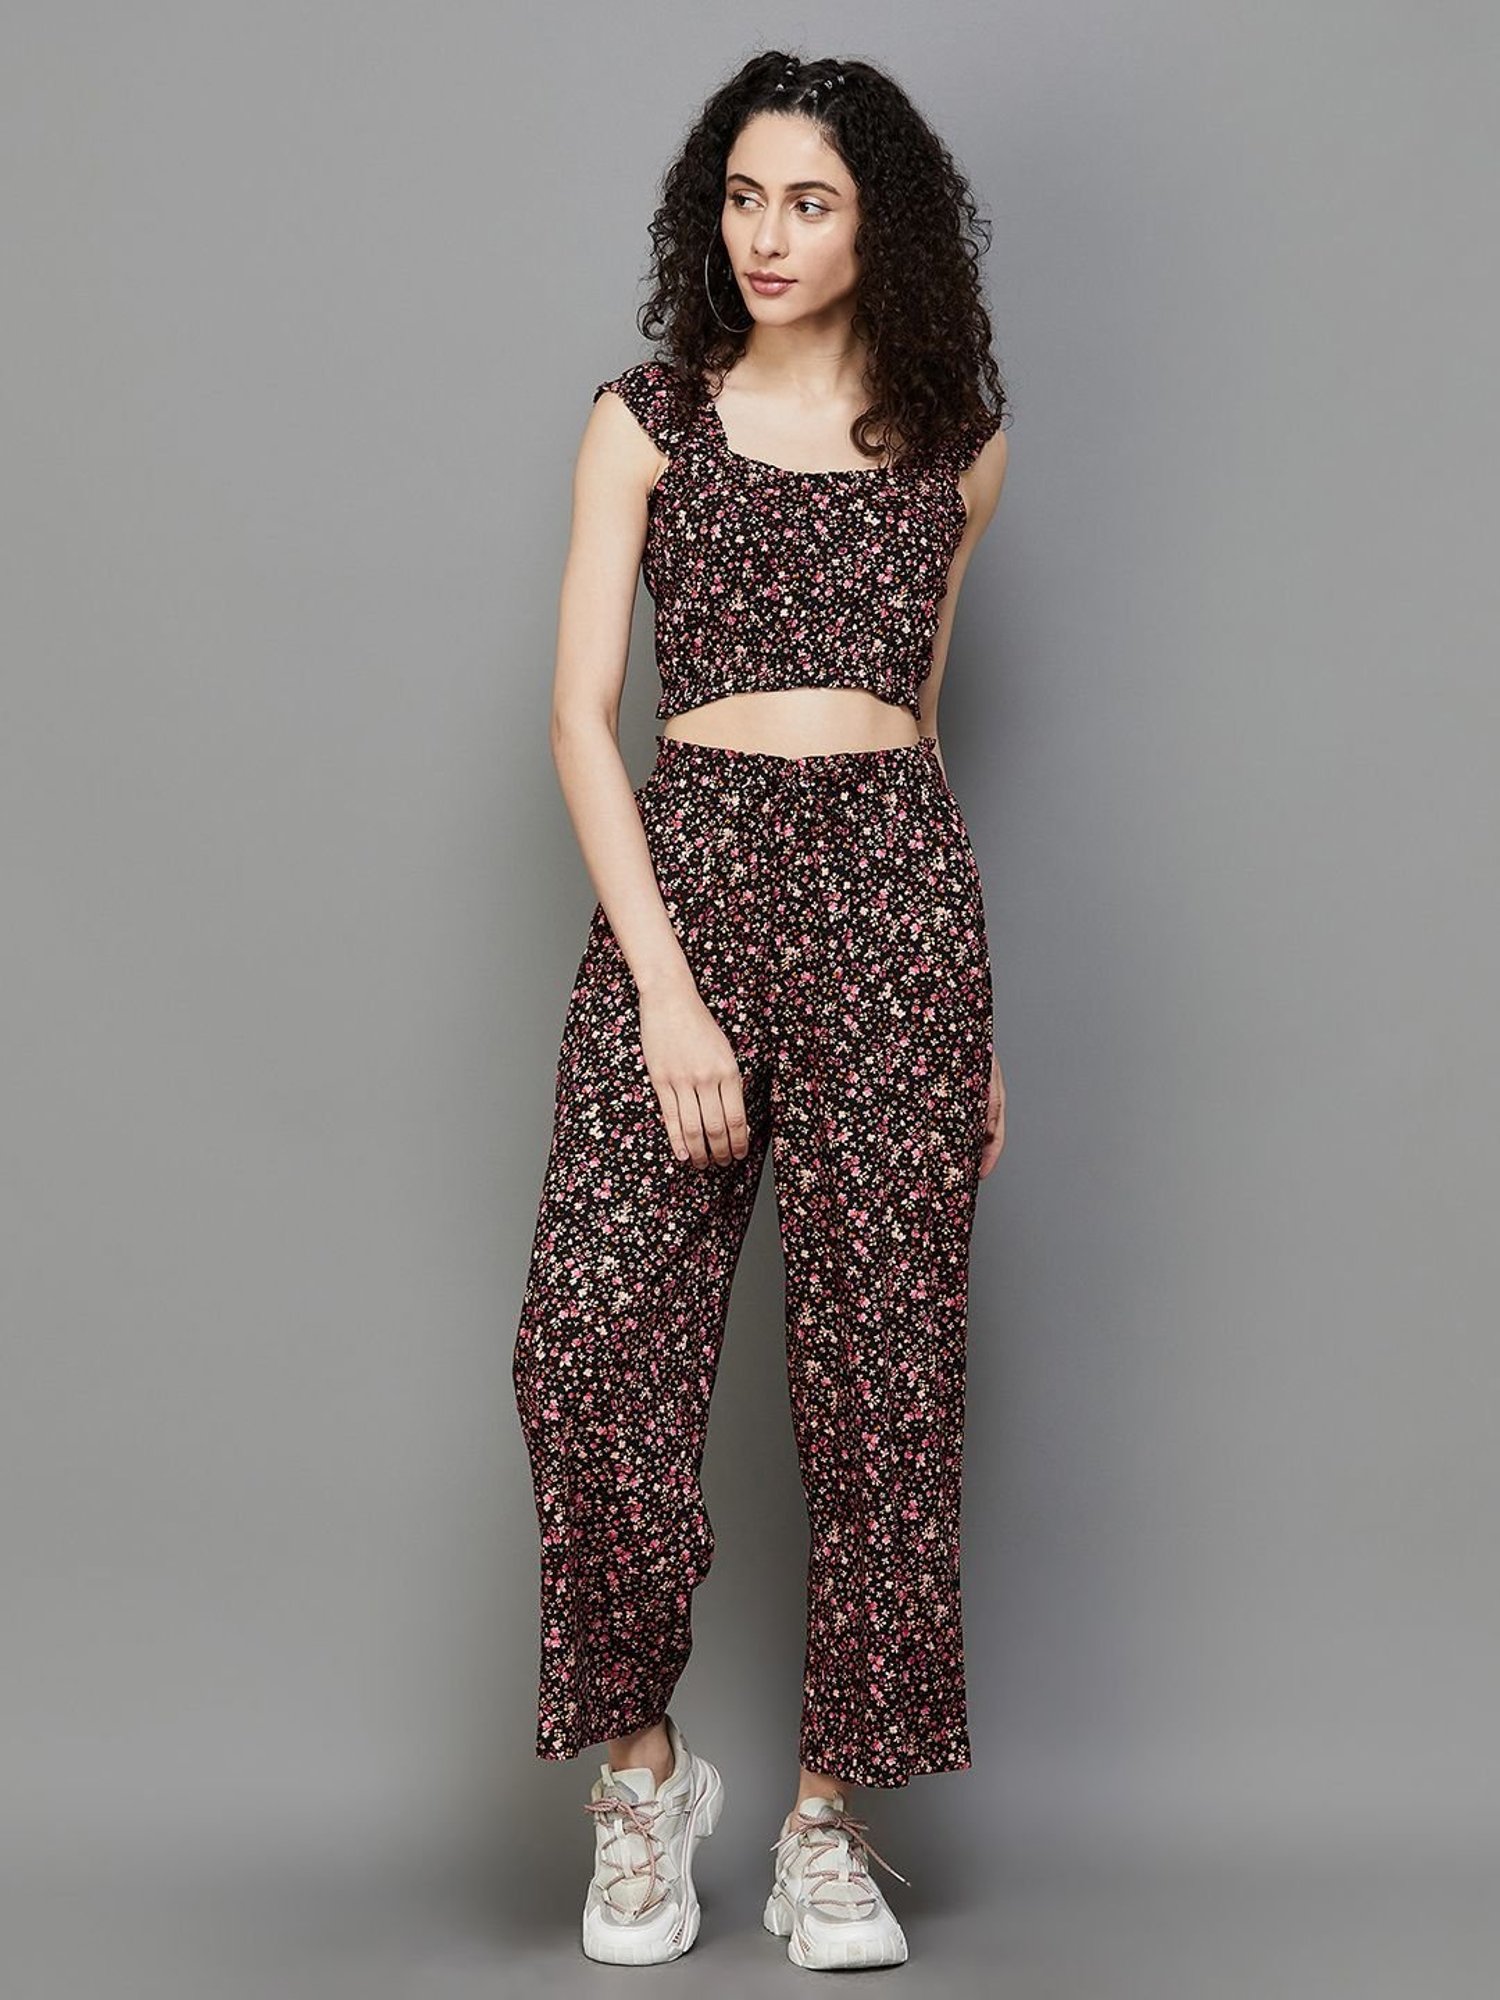 Women Floral Print Two Piece Set Casual Party Sleeveless Crop Top Pants  Outfit | eBay